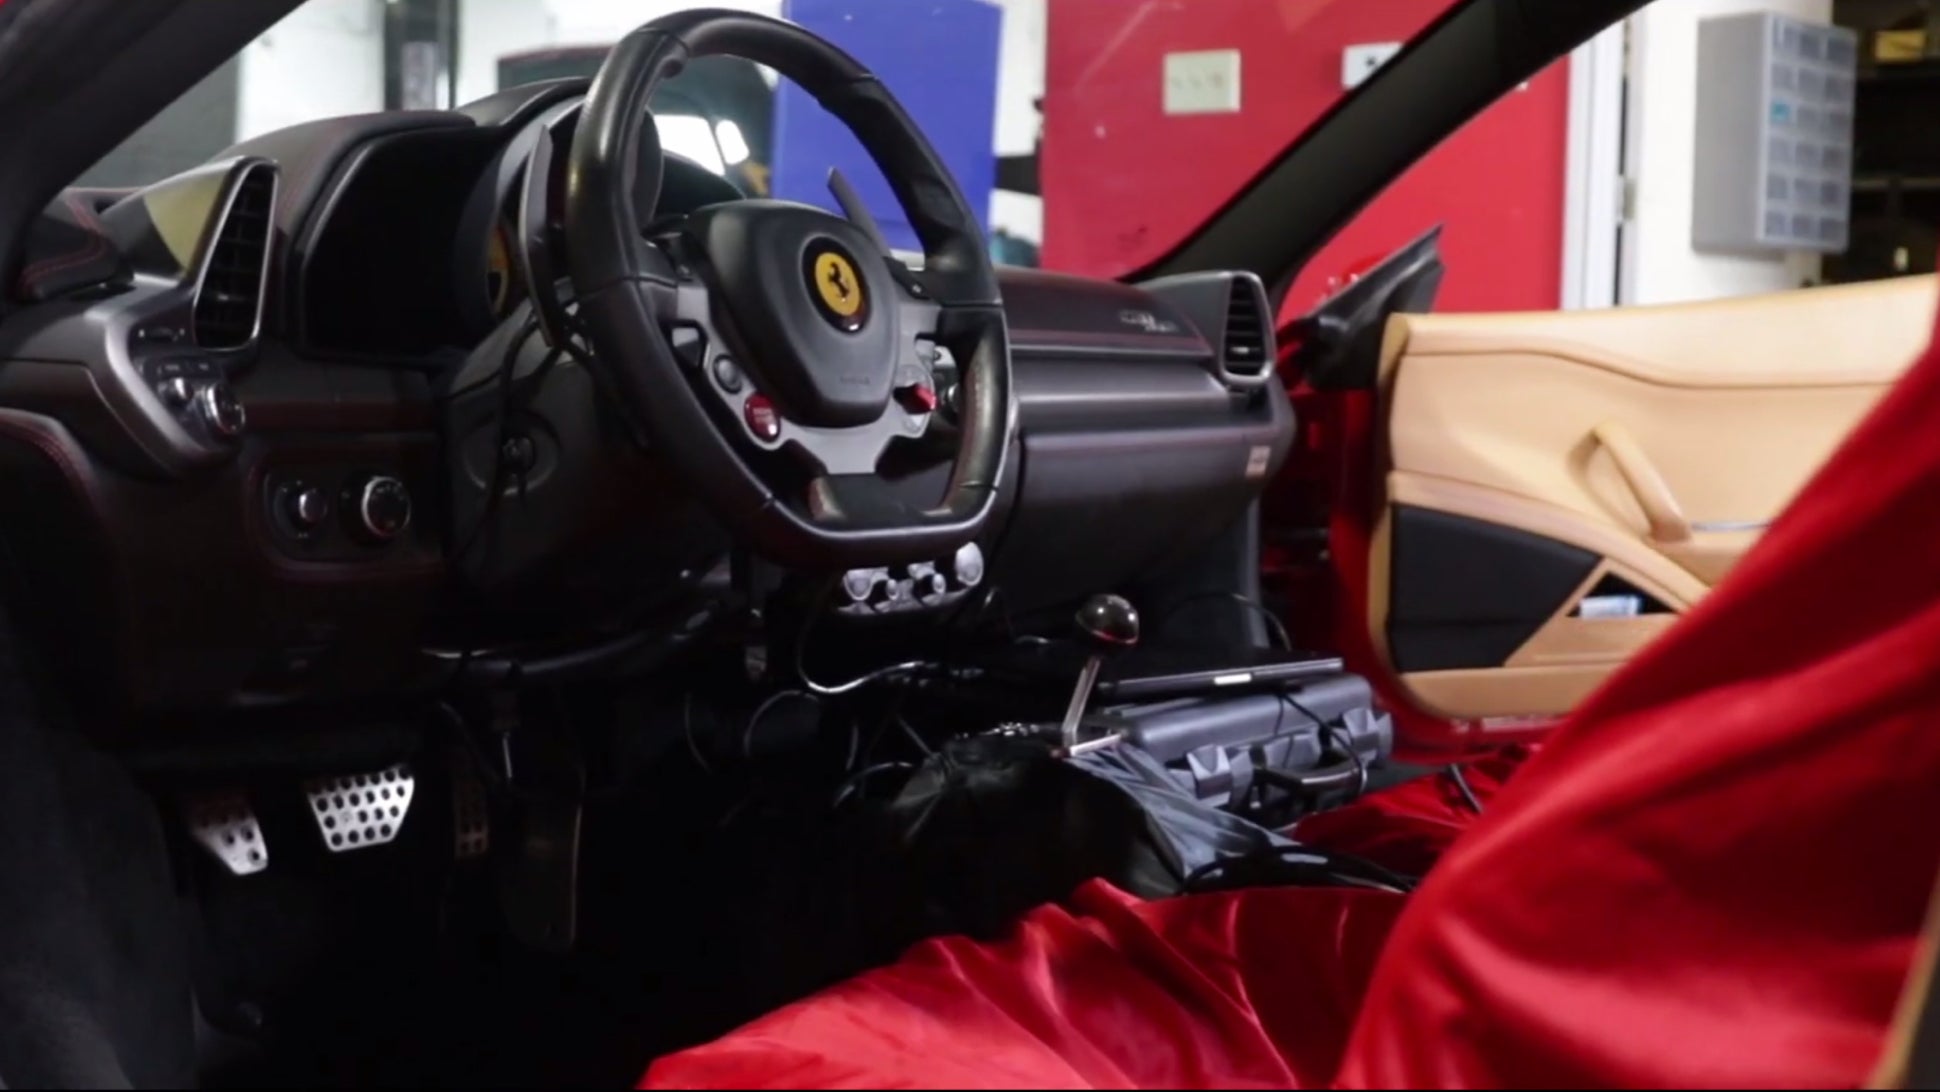 Think of the Children: Texas Shop Builds Ferrari 458 Italia With Six-Speed Gated Manual